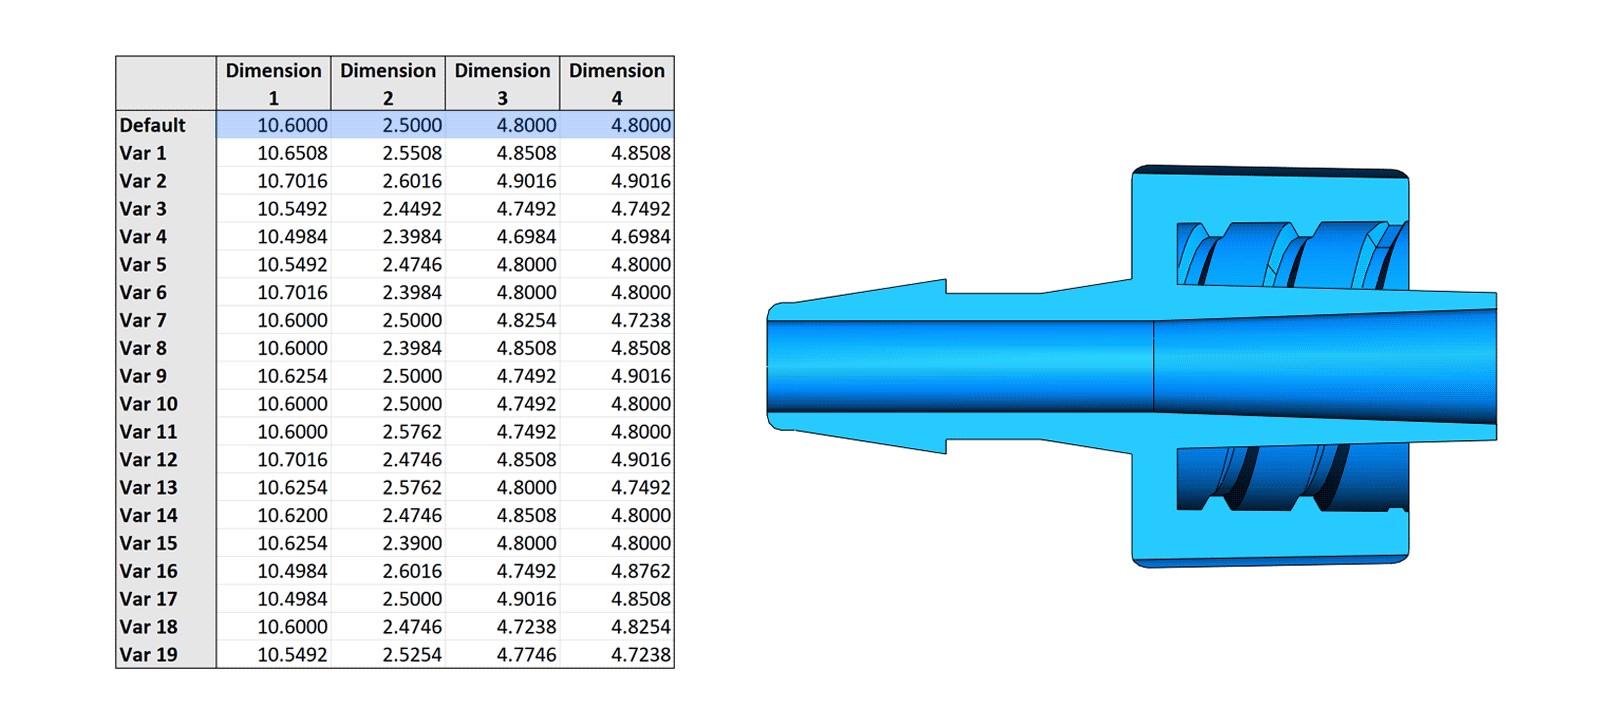 Synthetic Data Generation showing Design Variation